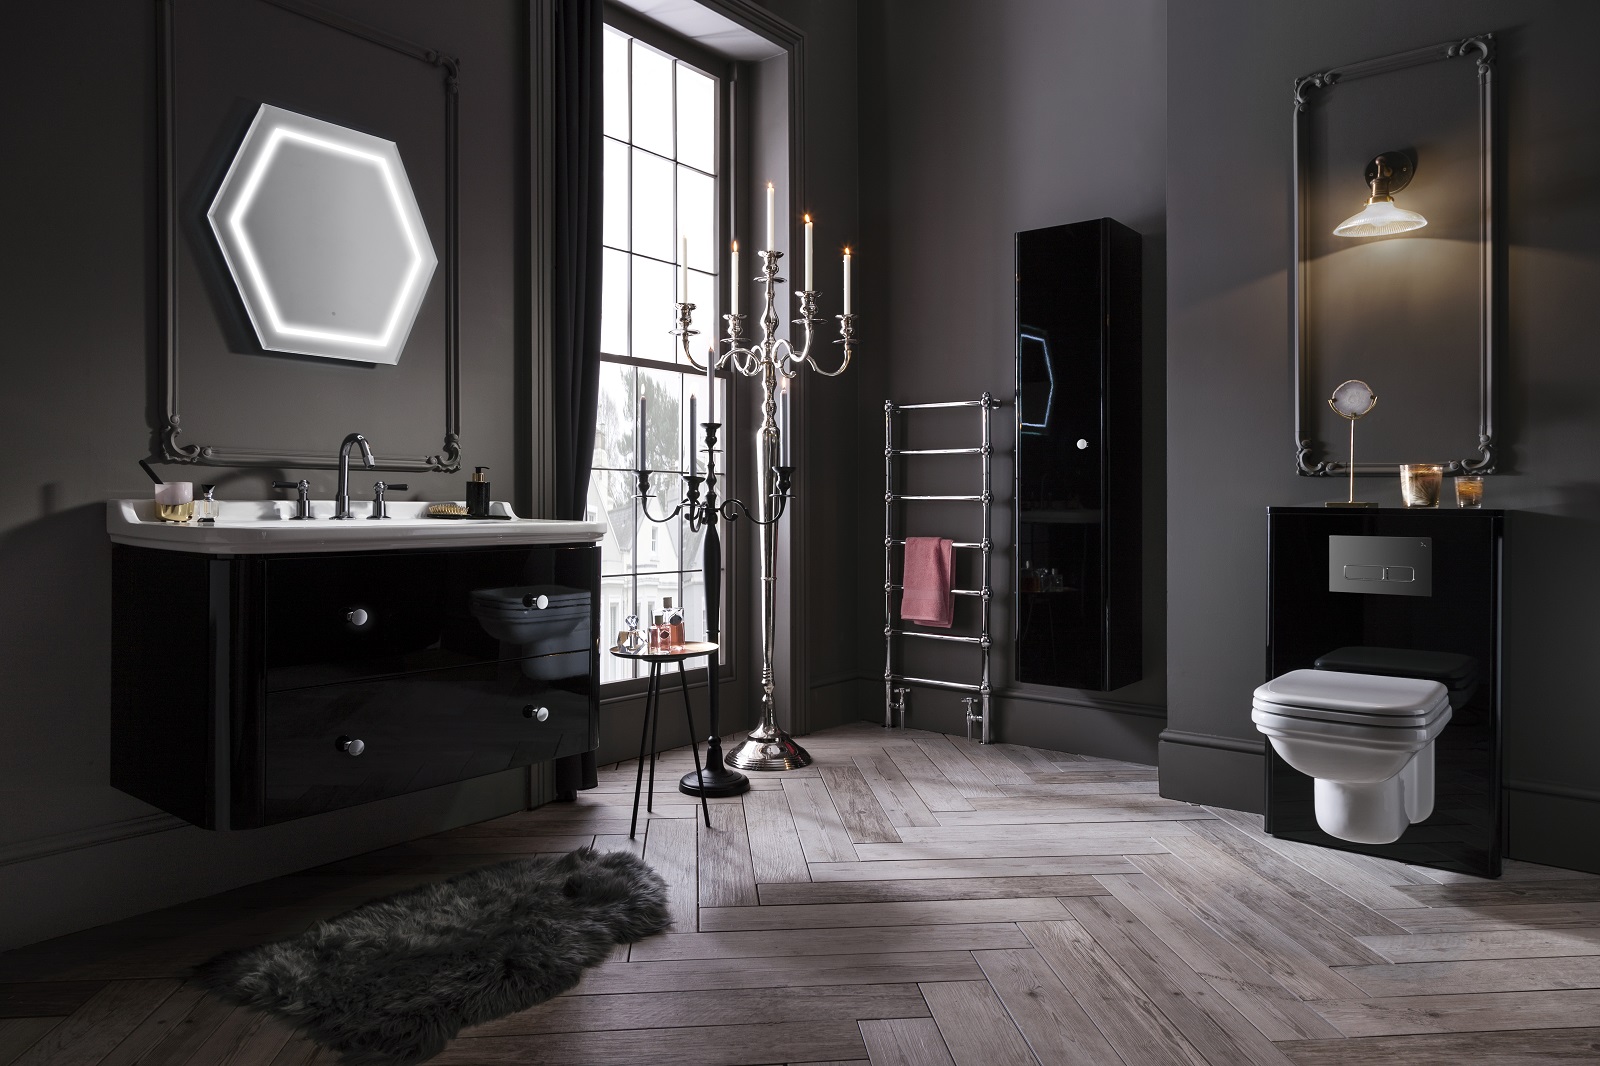 Lifestyle image of a black bathroom design, featuring a gloss black washbasin unit, a gloss black wall hung cabinet, a gloss black cistern housing and black painted walls